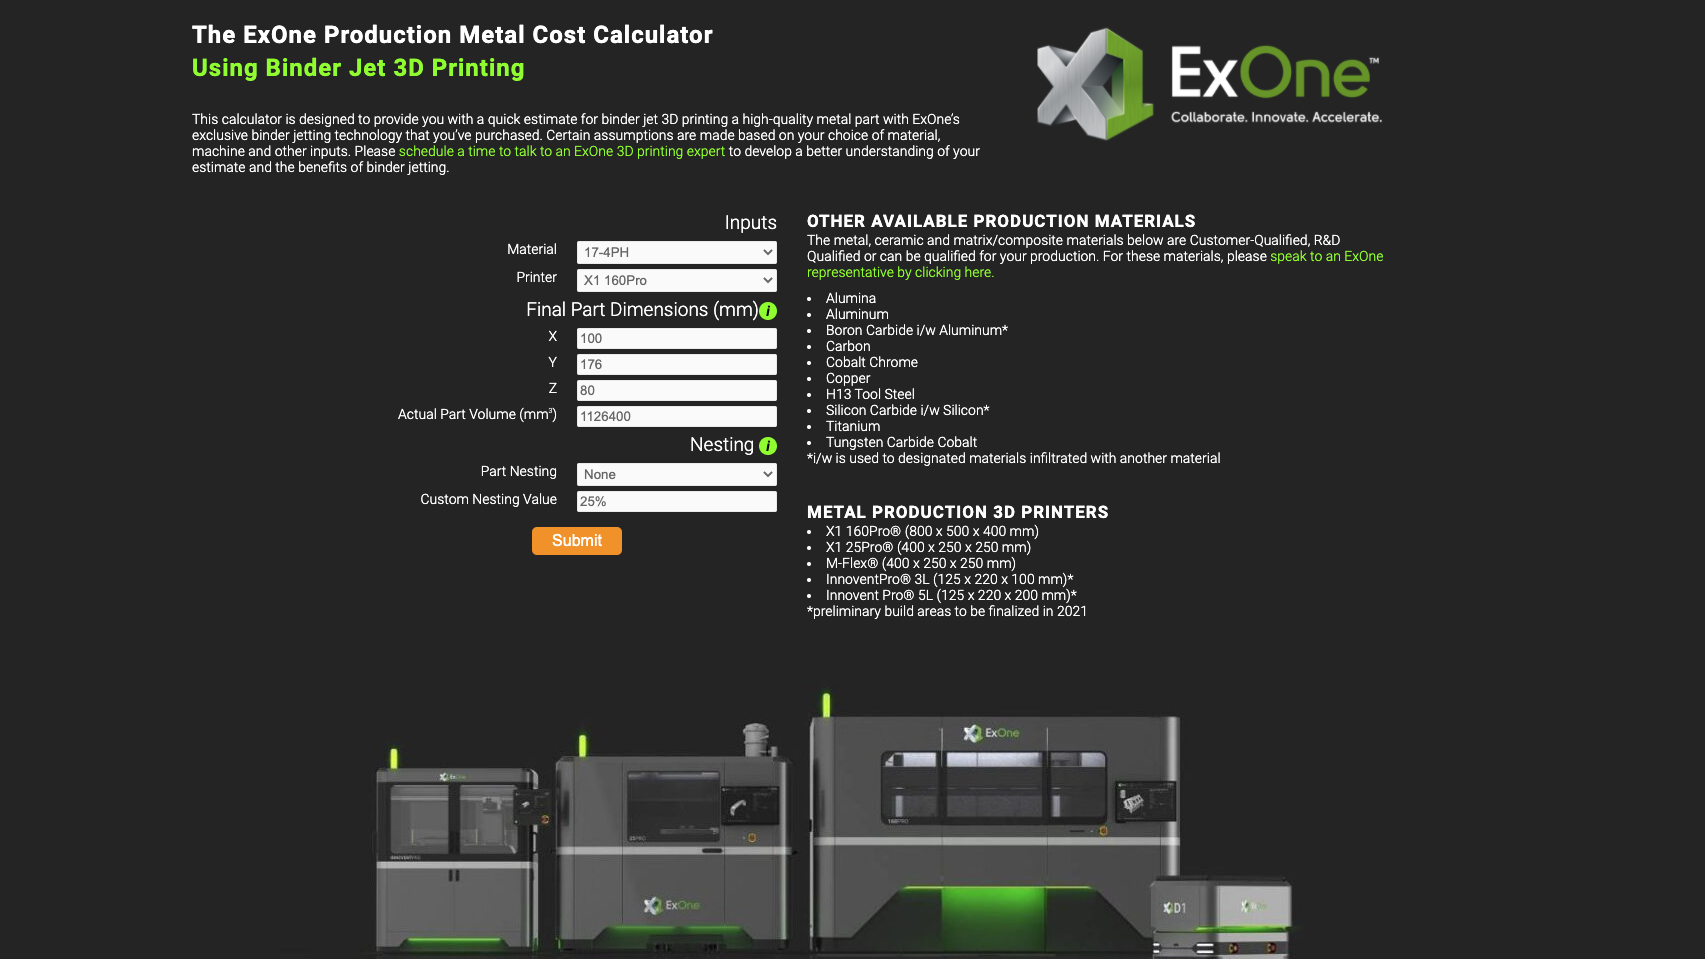 The ExOne Production Metal Cost Calculator. Image via ExOne.